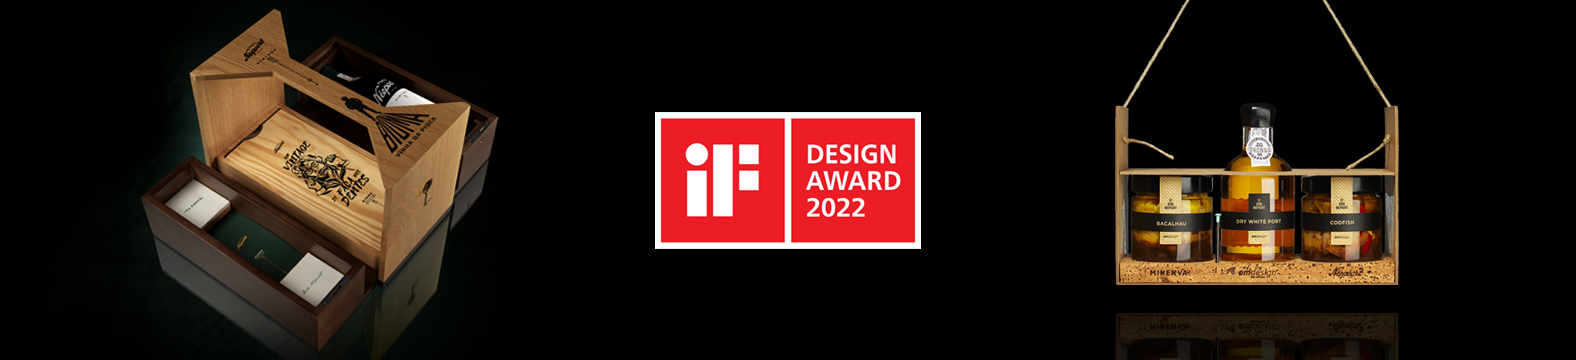 Omdesign brings two more iF Awards from Berlin to Portugal